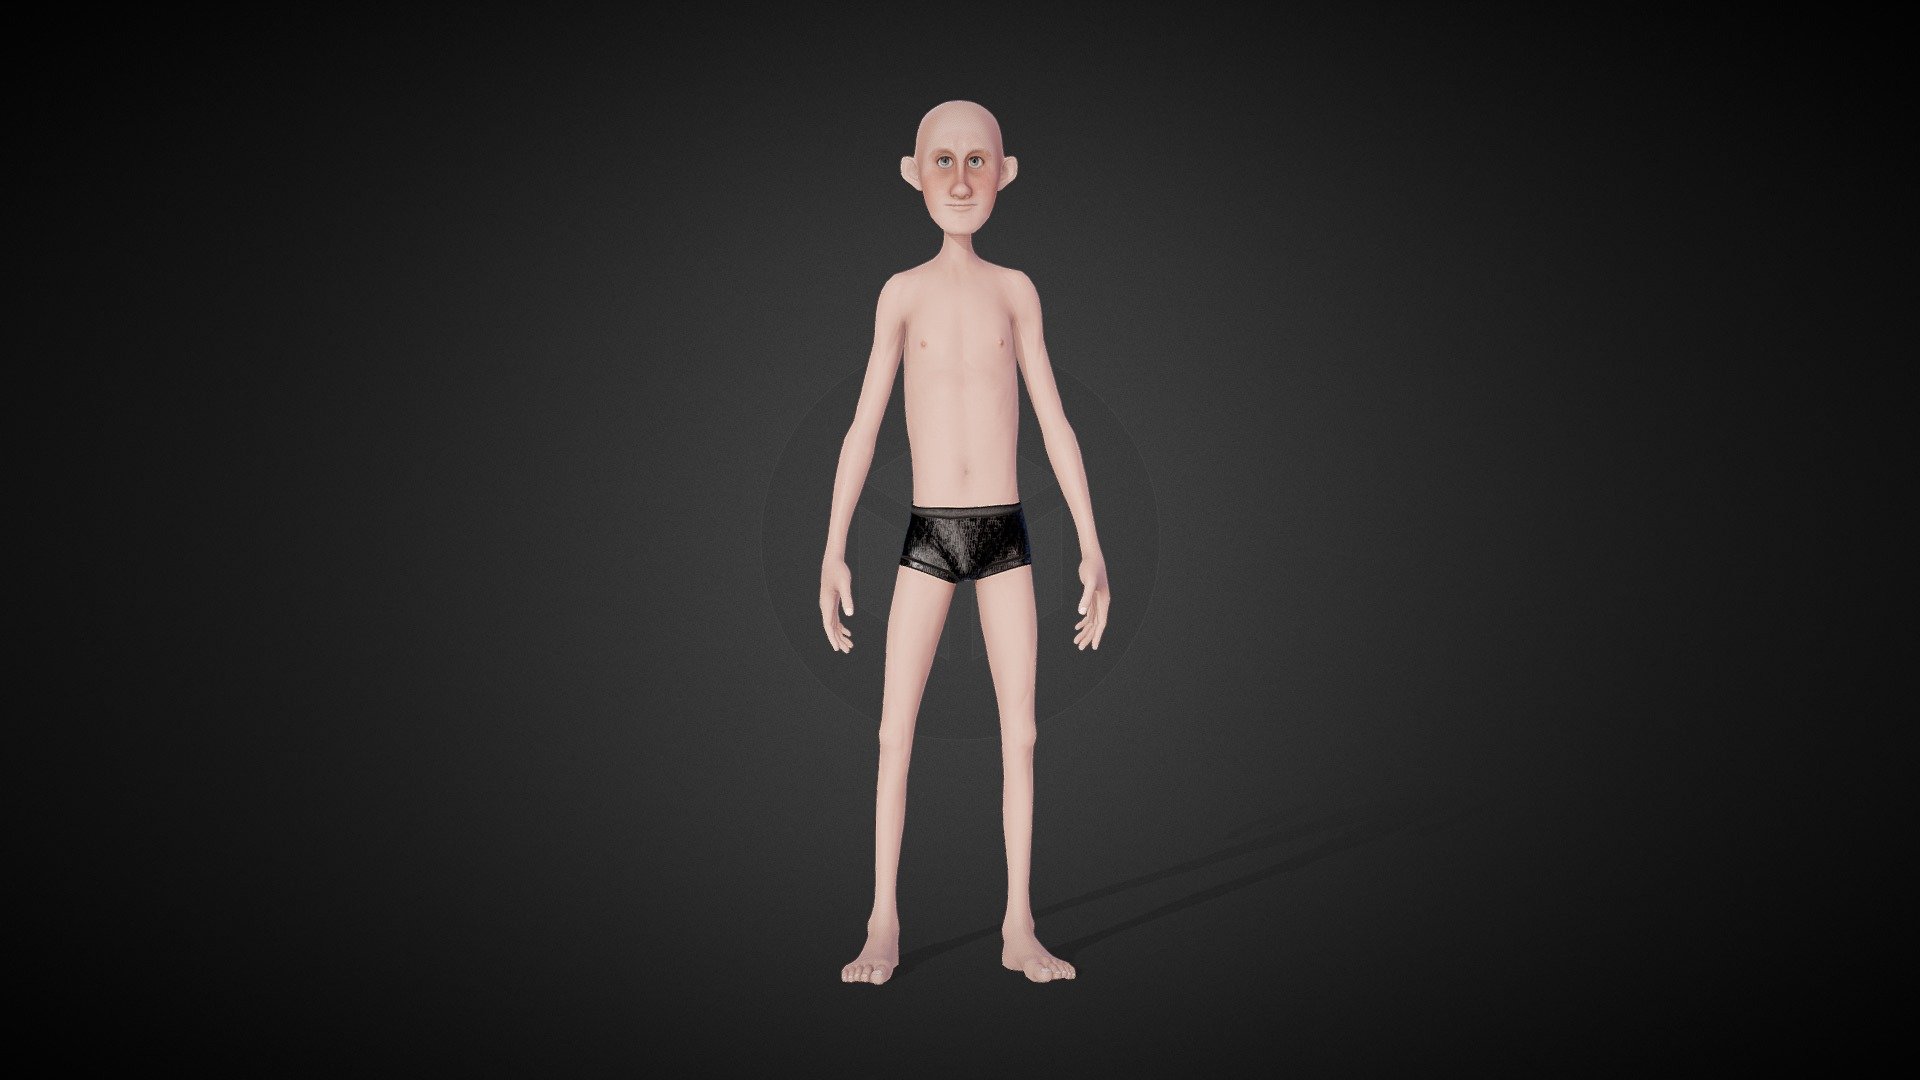 CC4 Peter (CC1 character now remastered for Character Creator 4)

Find out more here:
https://marketplace.reallusion.com/cc4-stylized-base-combo-remastered

You are looking for characters for your project? Check out all my Character Creator assets here:
https://www.reallusion.com/contentstore/featureddeveloper/profile/#!/ToKoMotion/Character%20Creator - CC4 Peter (CC1 Remastered) - 3D model by ToKoMotion 3d model